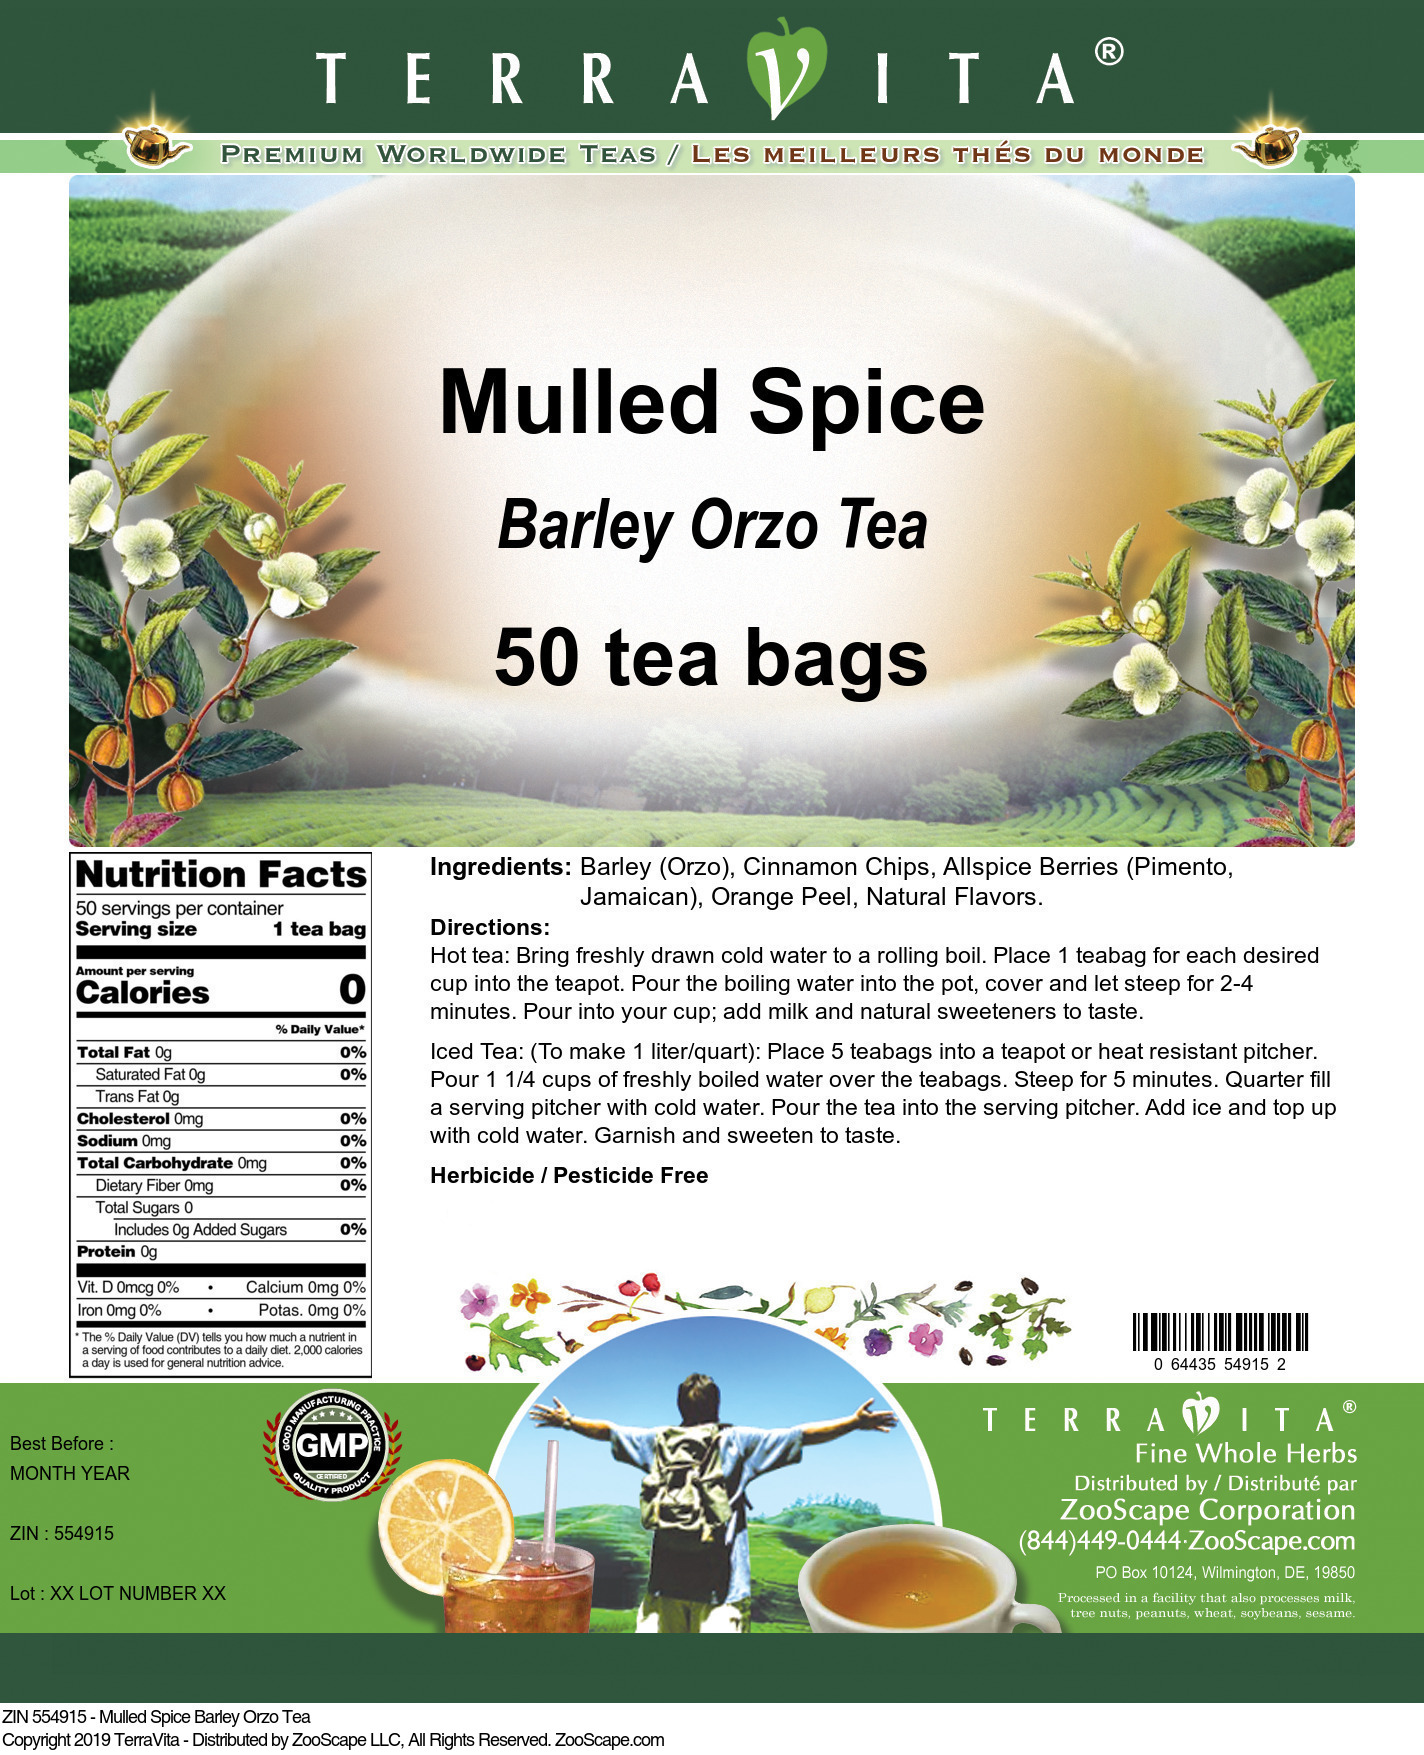 Mulled Spice Barley Orzo Tea - Label